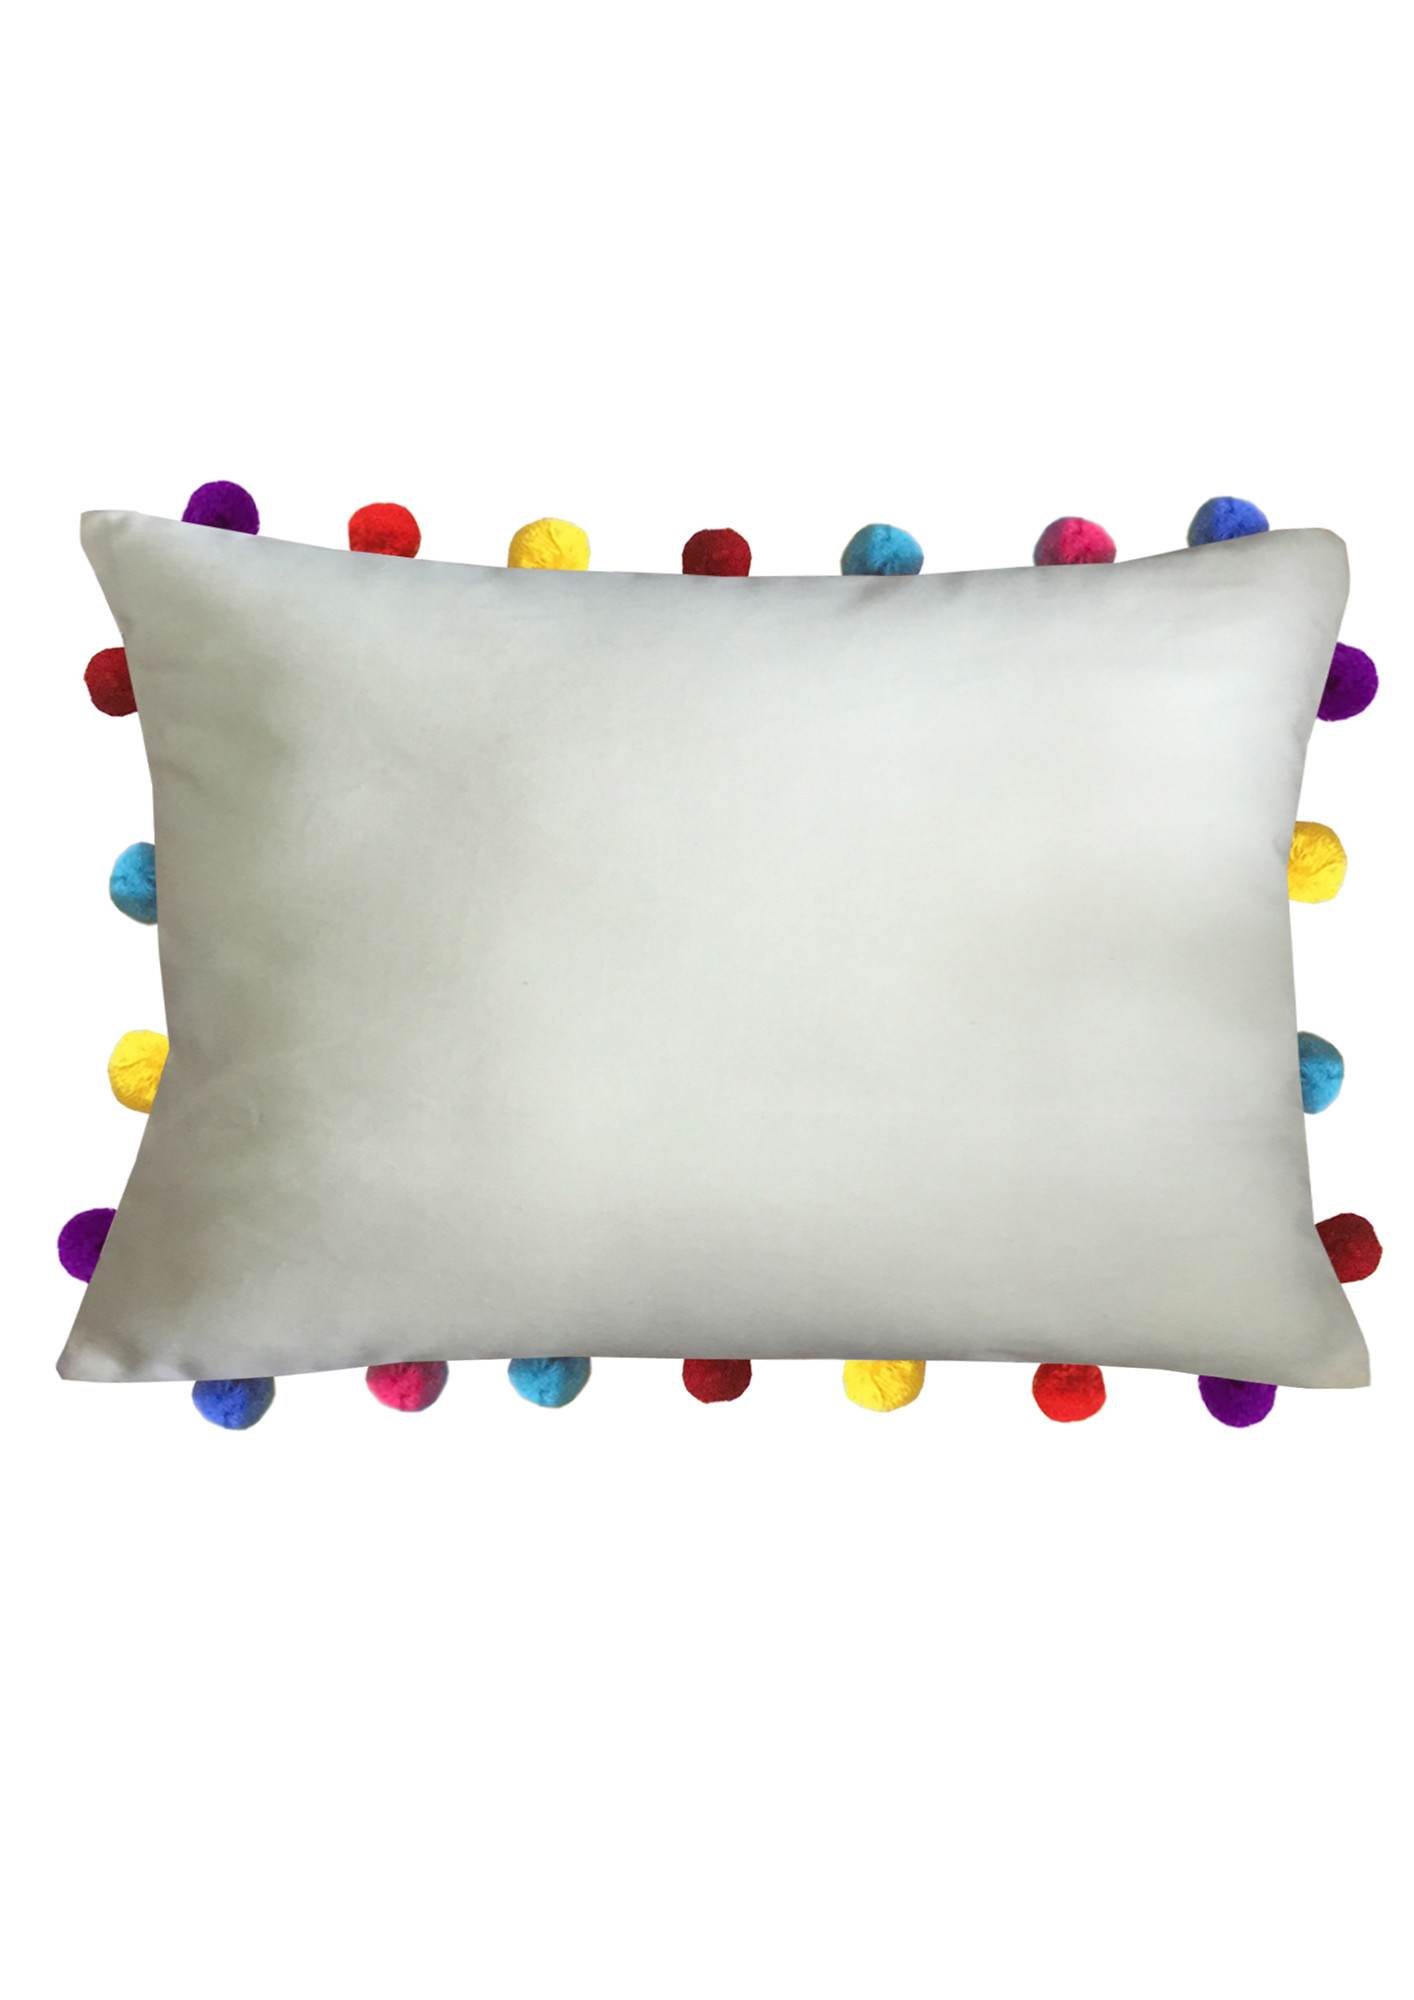 Lushomes Yellow Sofa Cushion Cover Online with Colorful Pom Pom (Pack of 1 pc, 14 x 20 inches)